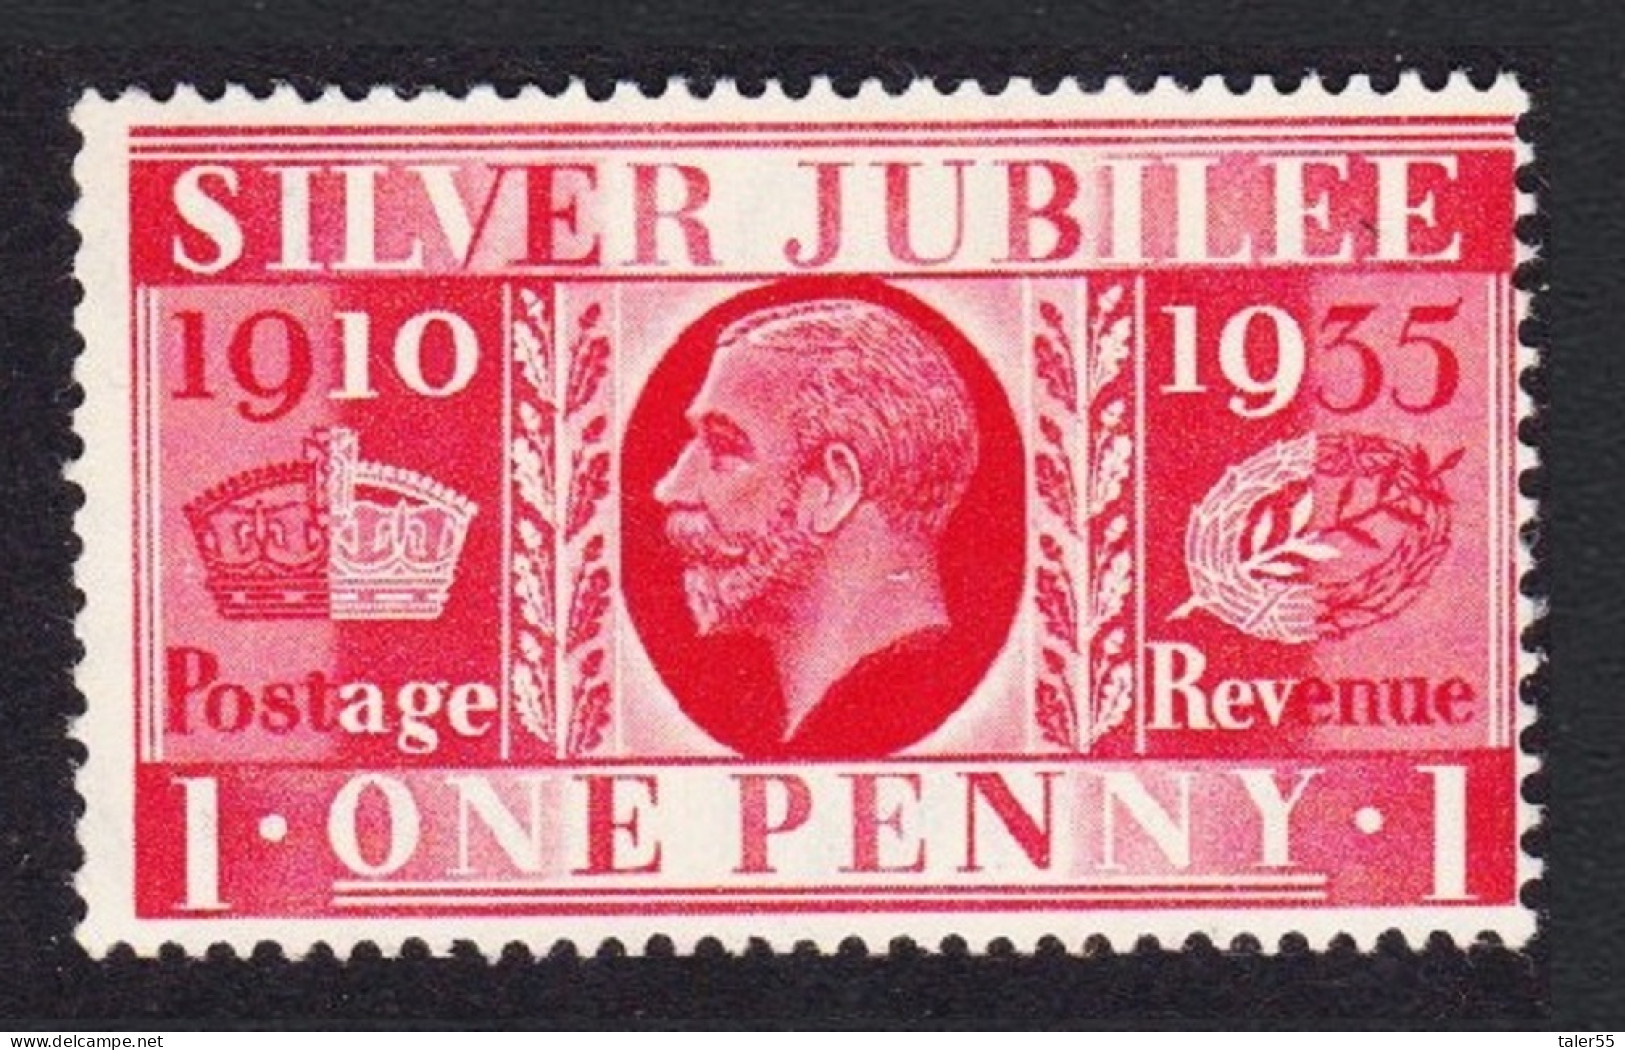 Great Britain George V Silver Jubilee One Penny Def 1935 SG#454 - Oblitérés